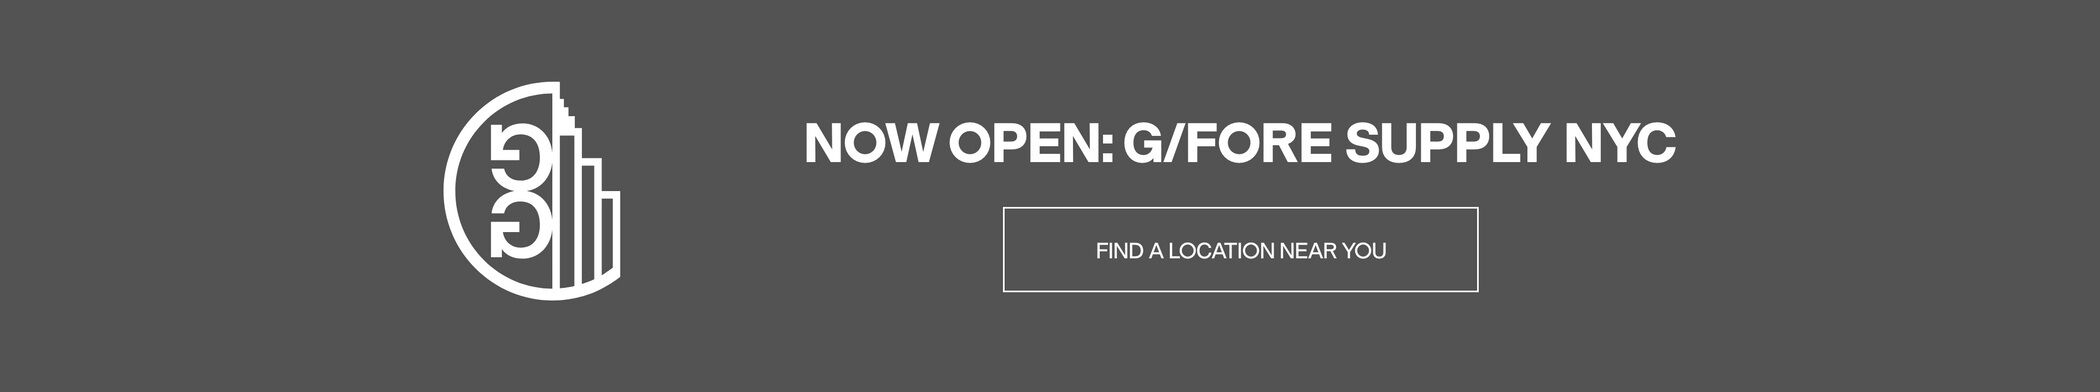 Now Open: GFORE Supply NYC